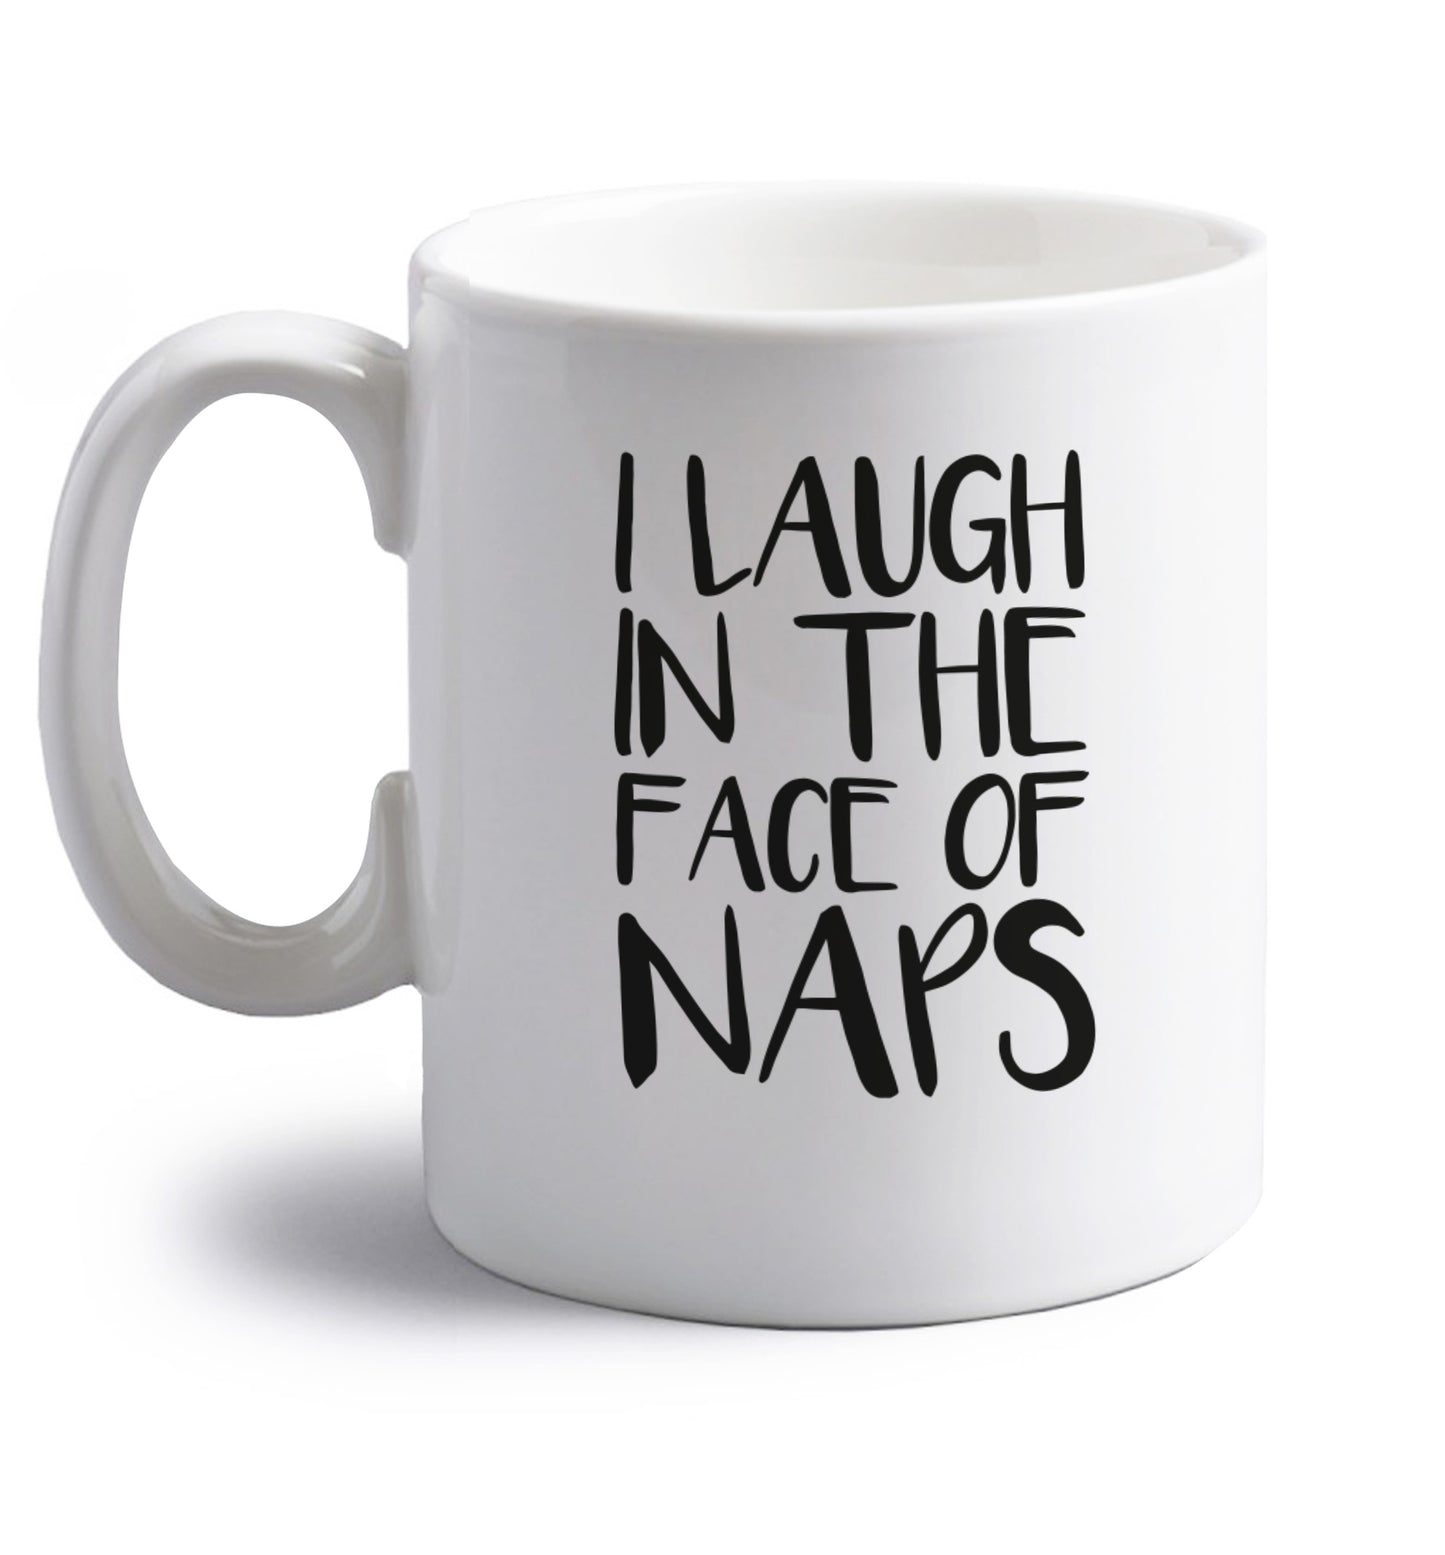 I laugh in the face of naps right handed white ceramic mug 